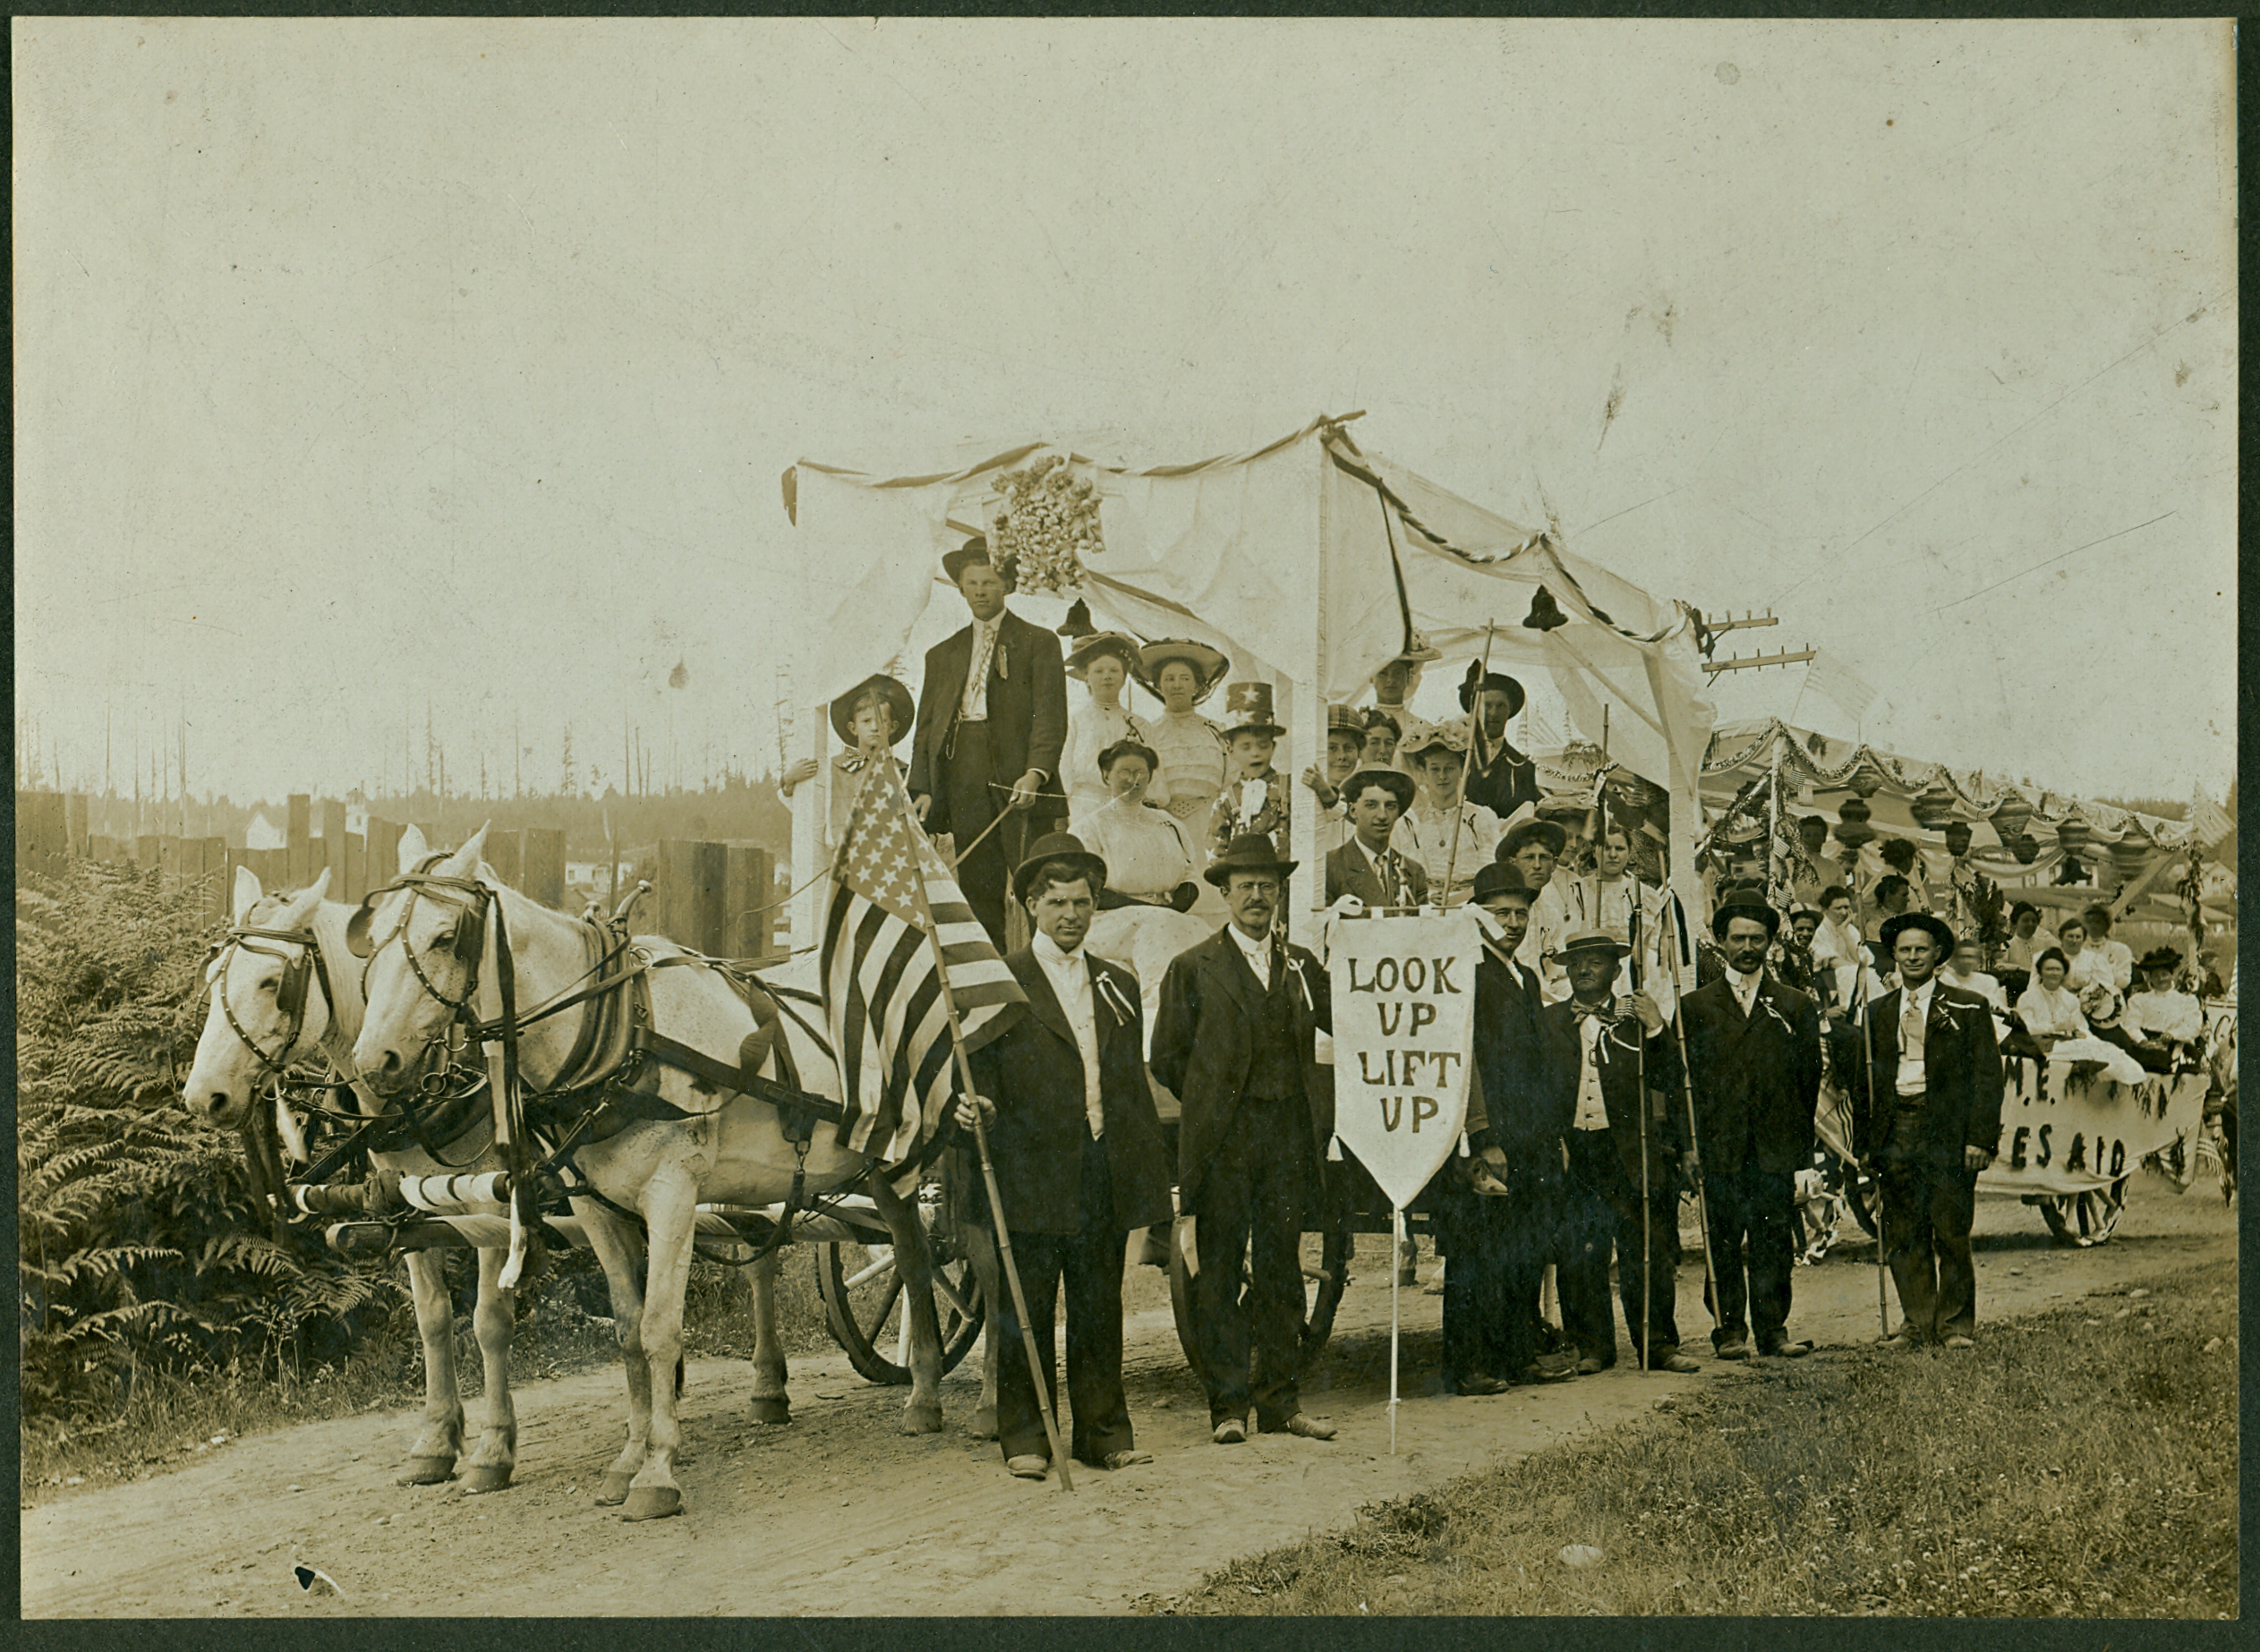 The Methodist Church float in the 1908 Bothell 4th of July Parade. The caption on the back of the picture identifies some of the participants. The driver/teamster is Howard Hosmer. Seated behind him is Lena Bothell. Standing behind her is Bertha Dutton. Clark Ross is standing just above the sign "Look Up Lift Up." 